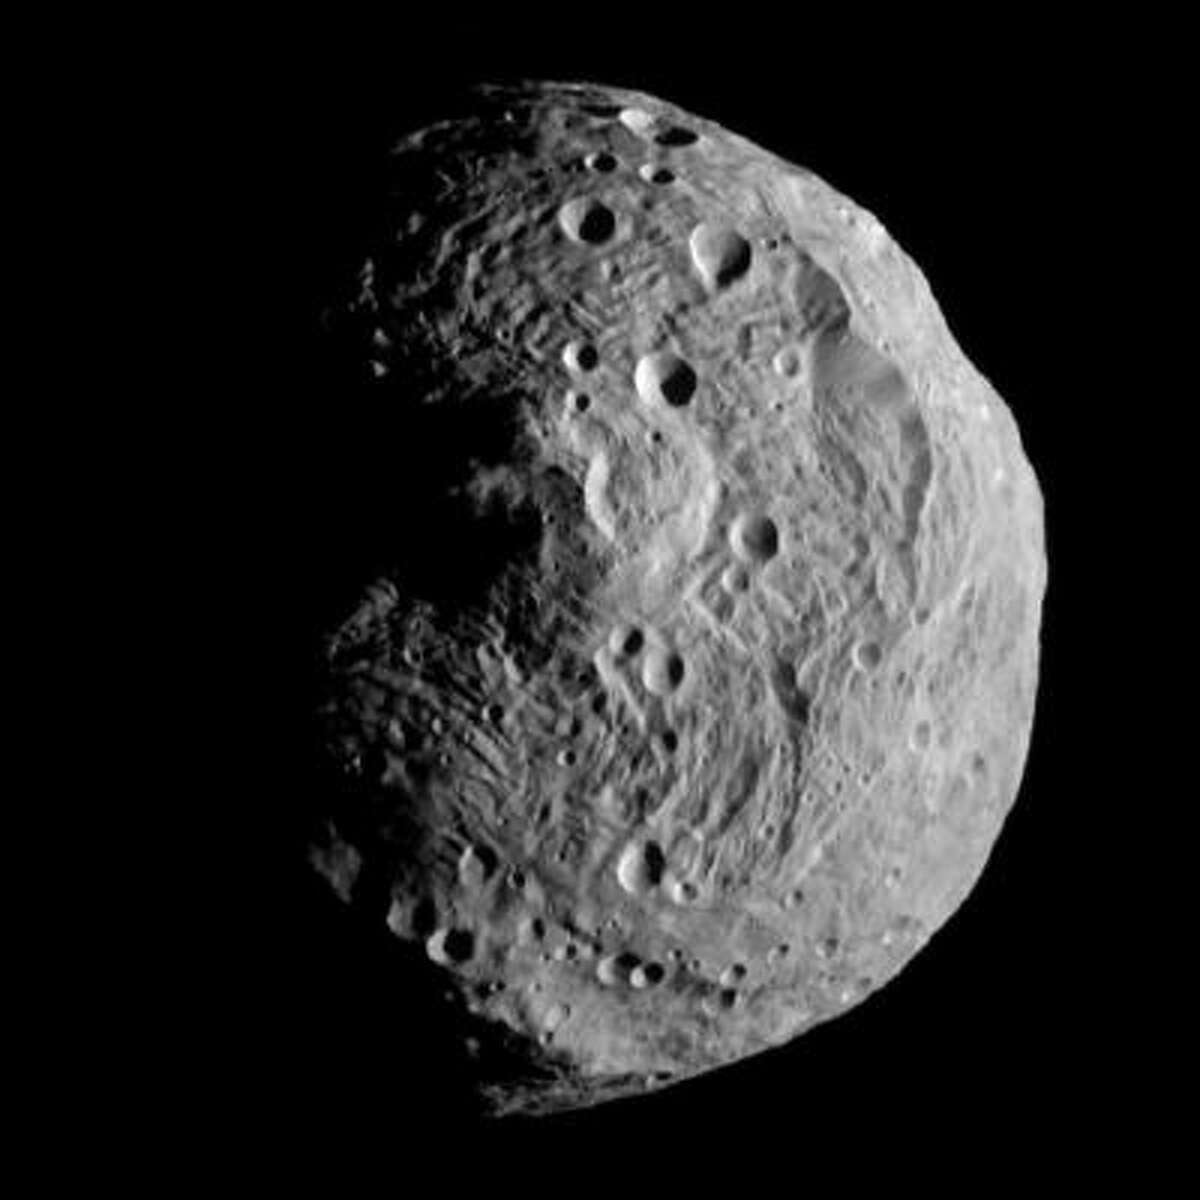 This file image released by the Jet Propulsion Laboratory on Monday, July 18, 2011 shows an asteroid photographed by the Dawn spacecraft on July 17, 2011.